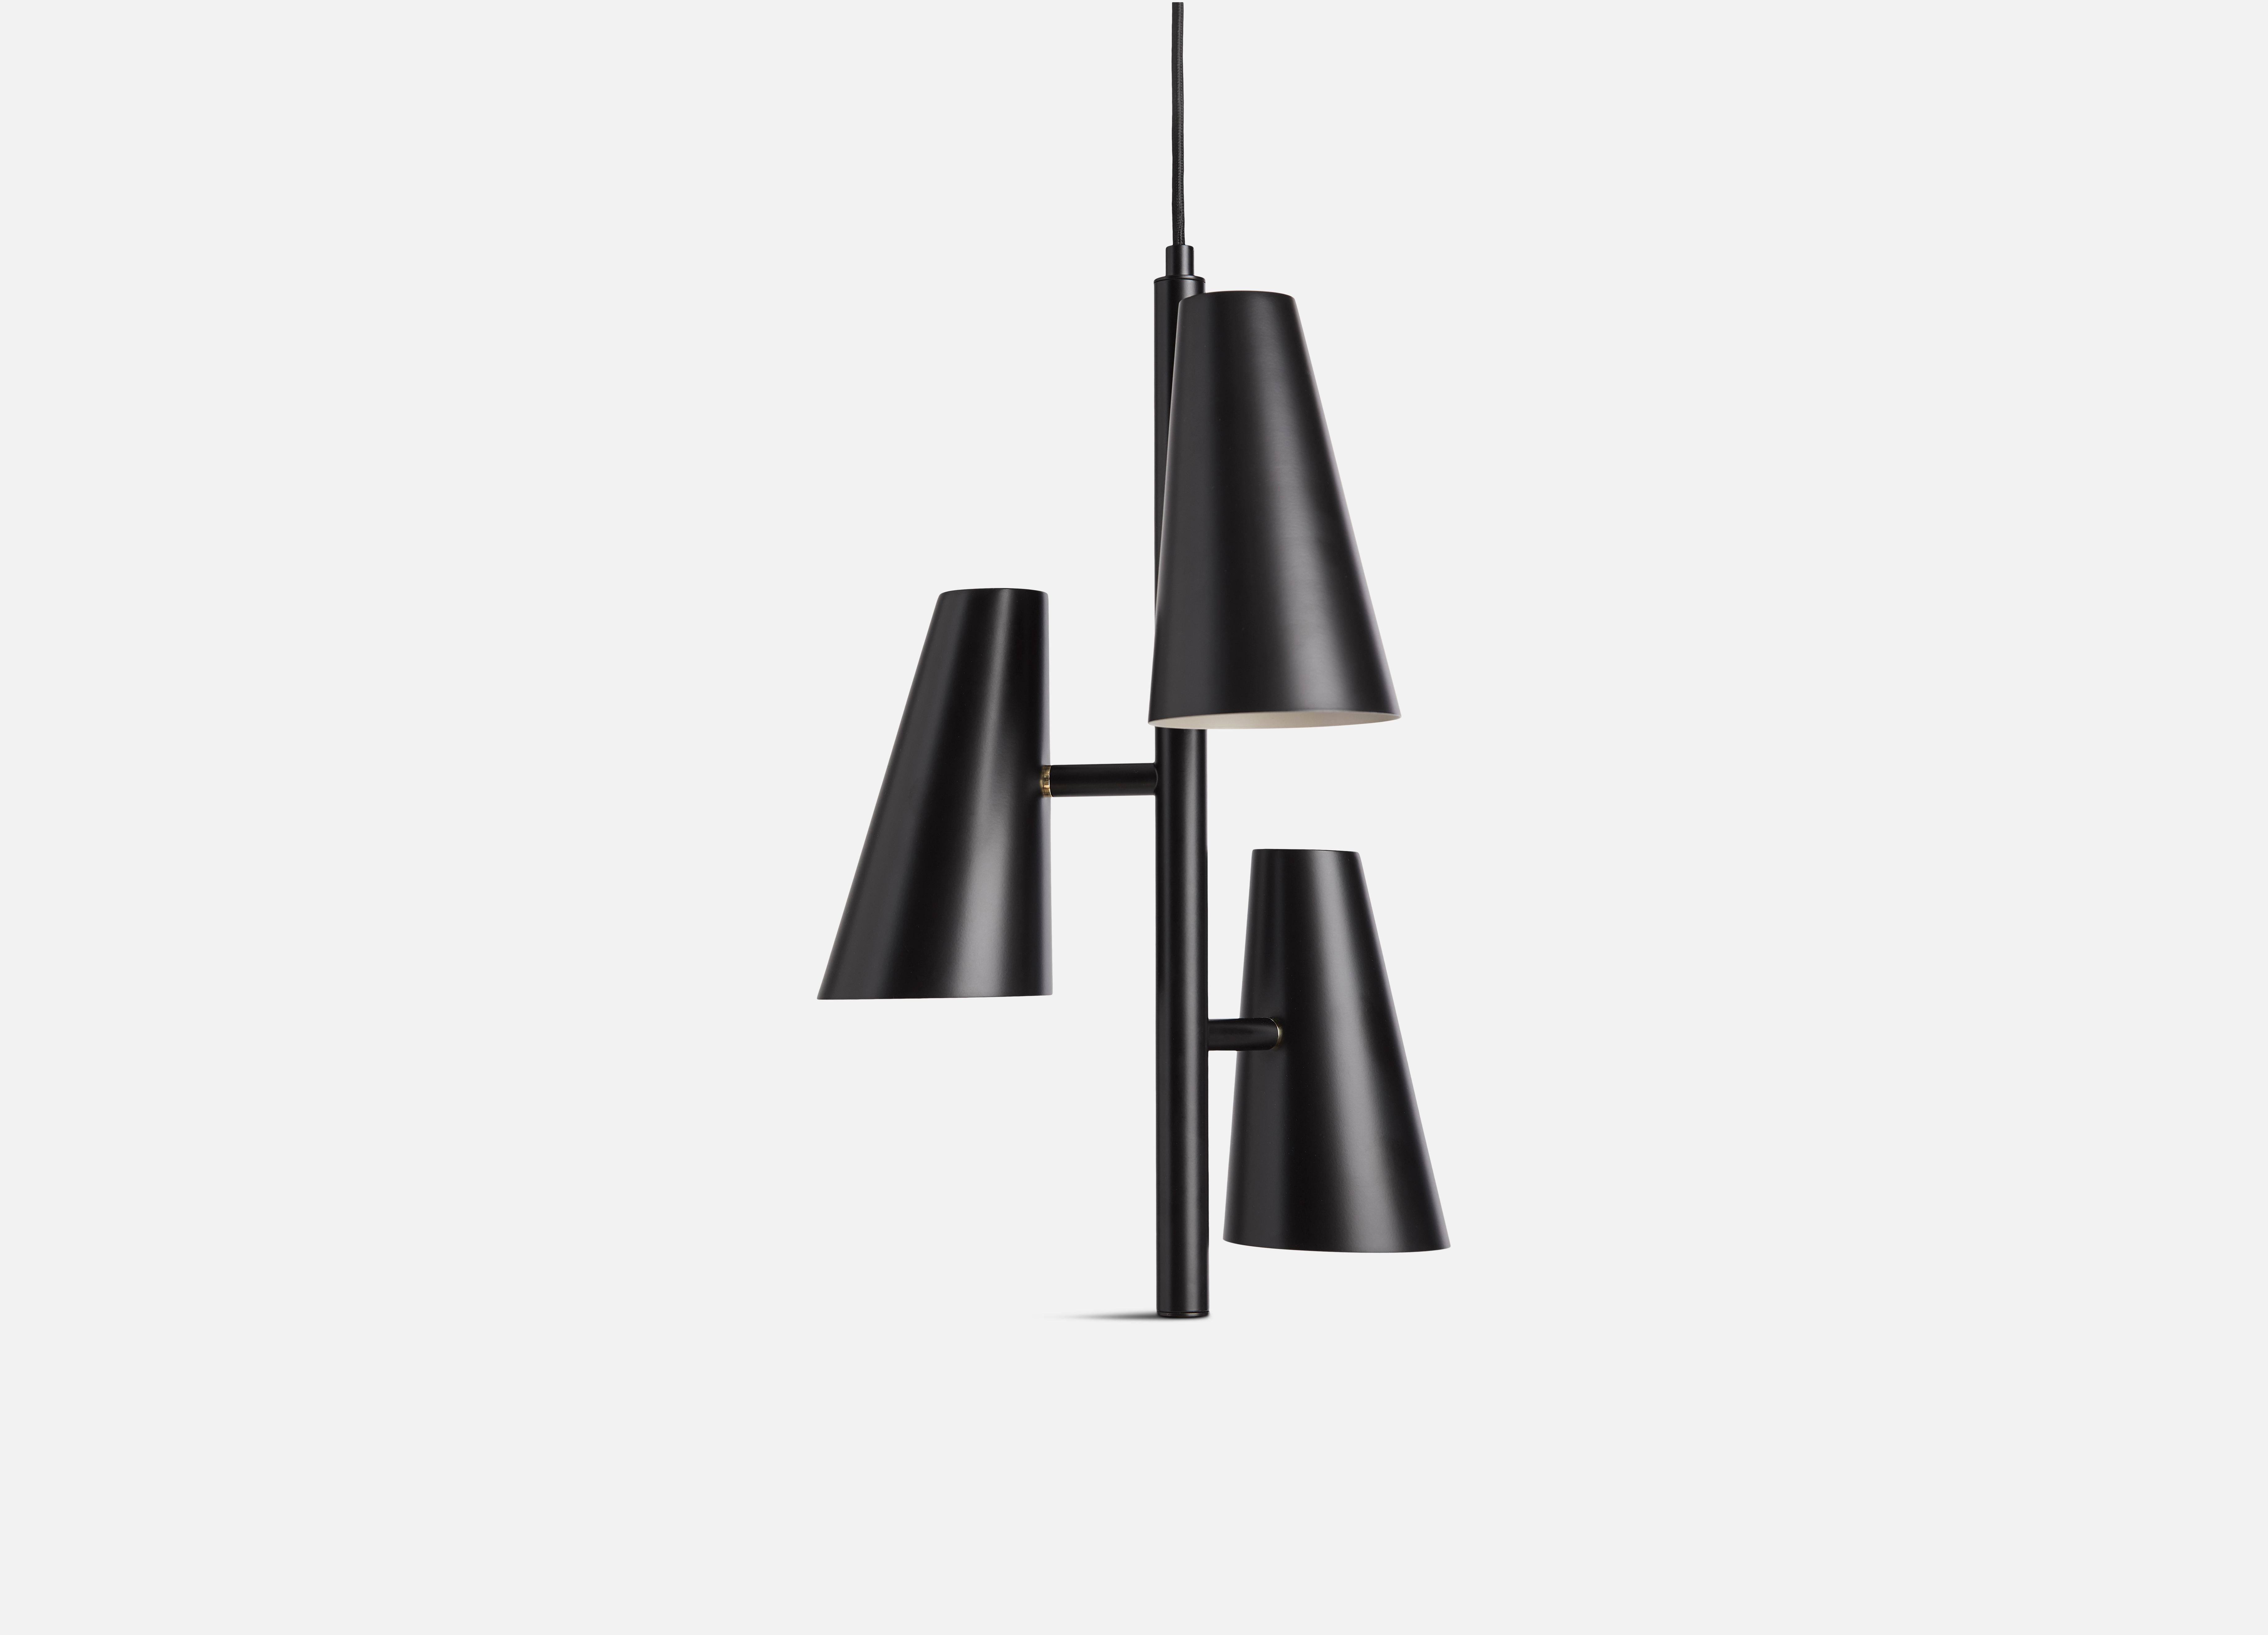 Cono 3 shades pendant lamp by Benny Frandsen.
Materials: metal.
Dimensions: D 36 x H 50 cm.

Benny Frandsen is a renowned and experienced danish designer and founder of the lighting company frandsen, which has designed, manufactured and marketed